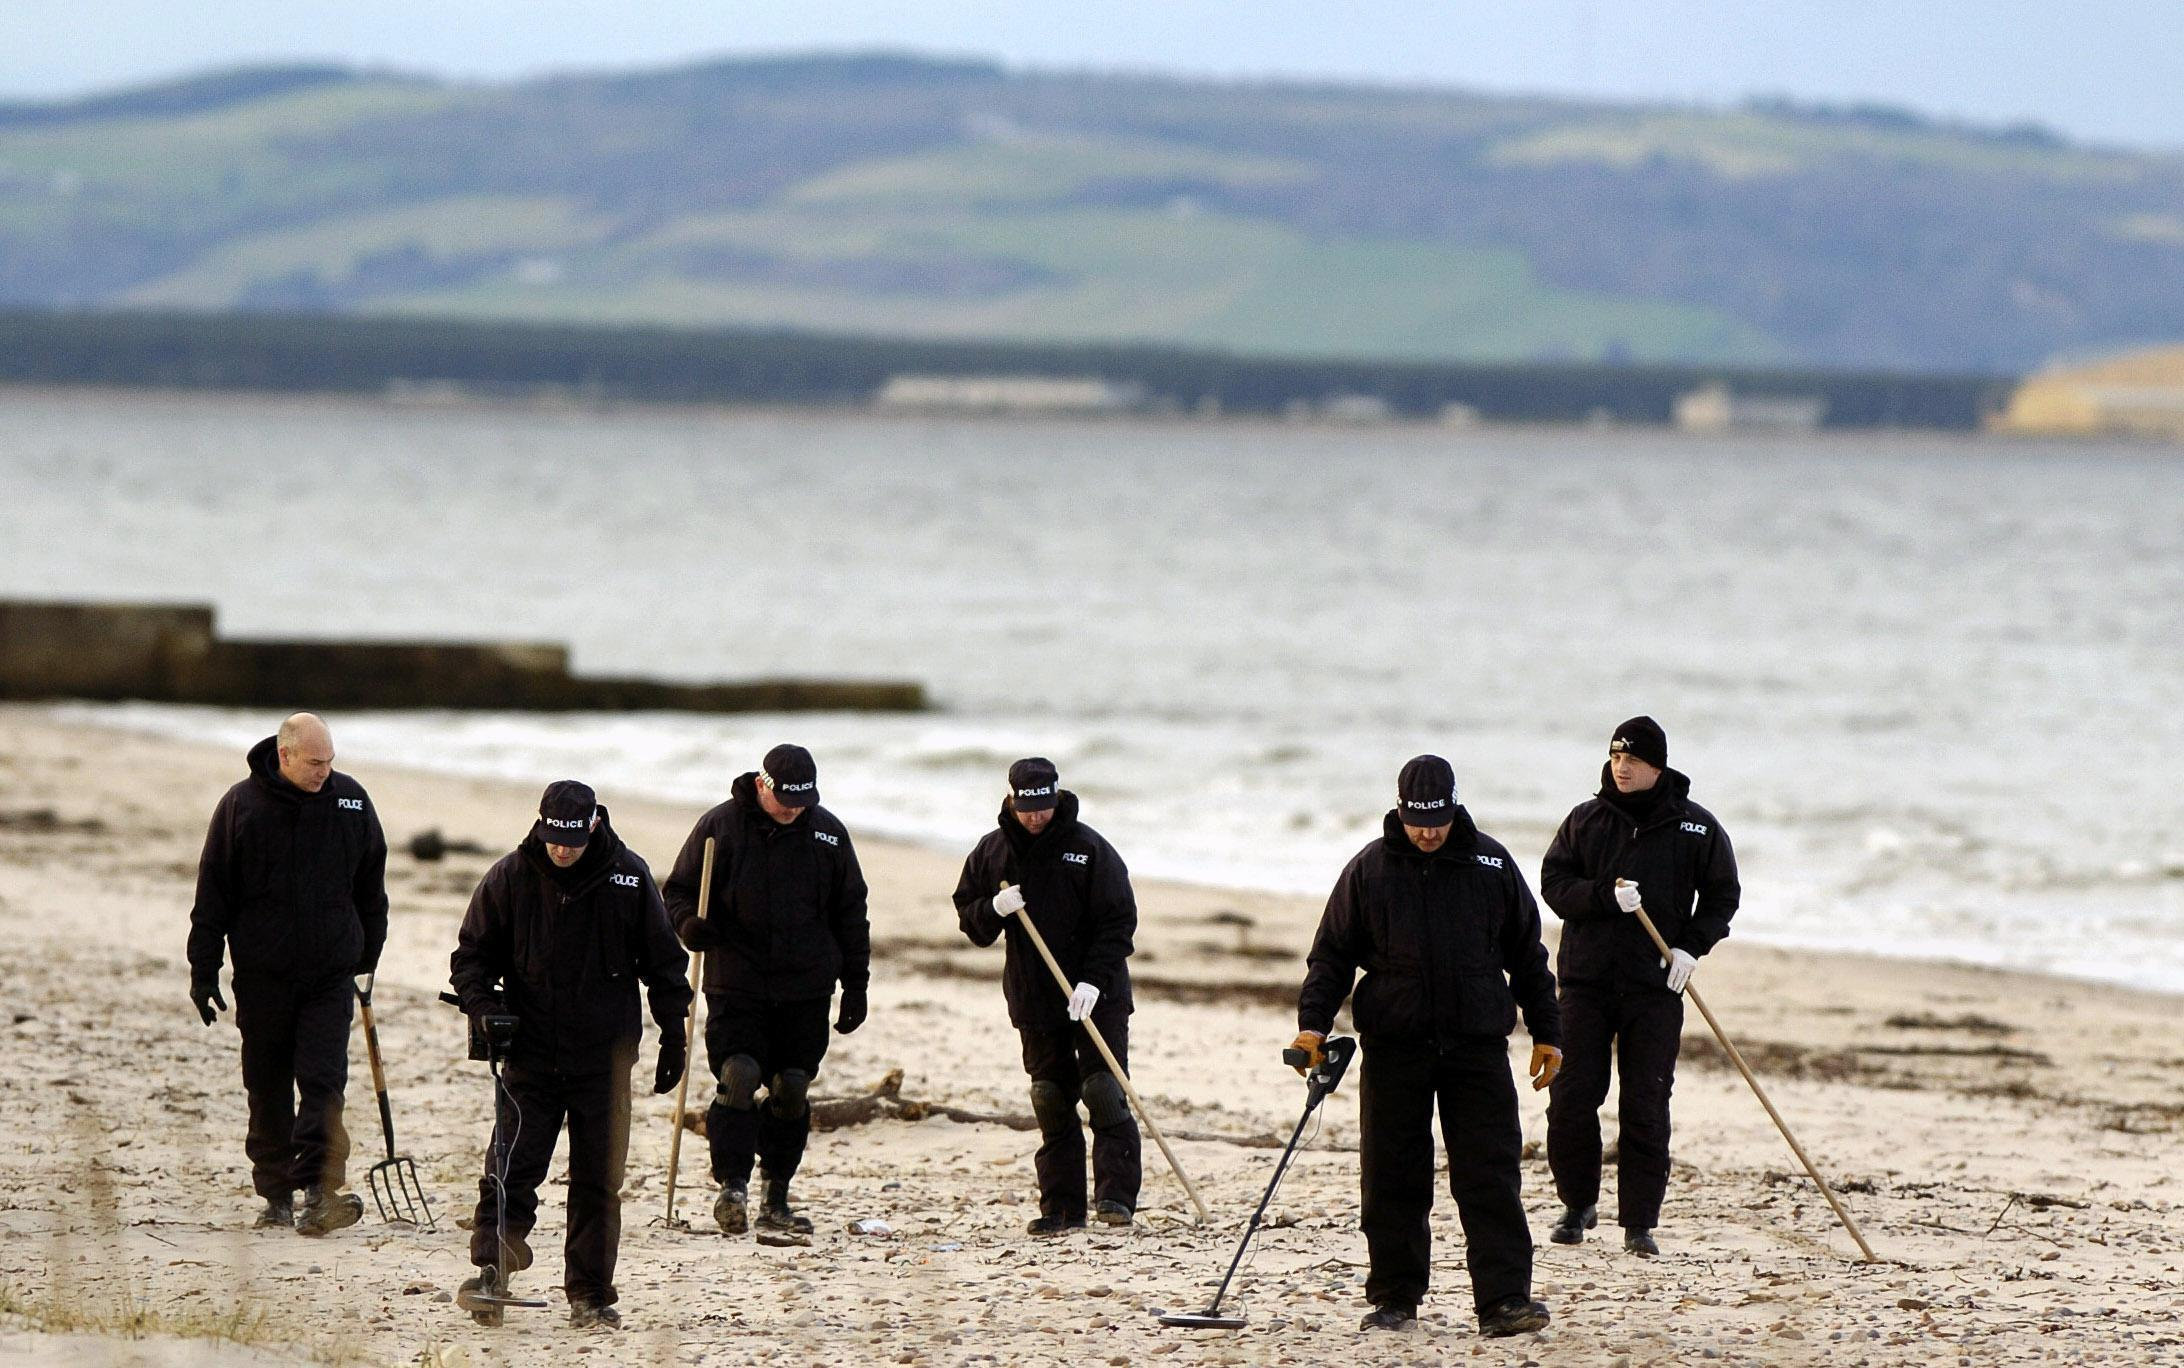 Police officers search Nairn beach, near Inverness, Scotland using metal detectors.